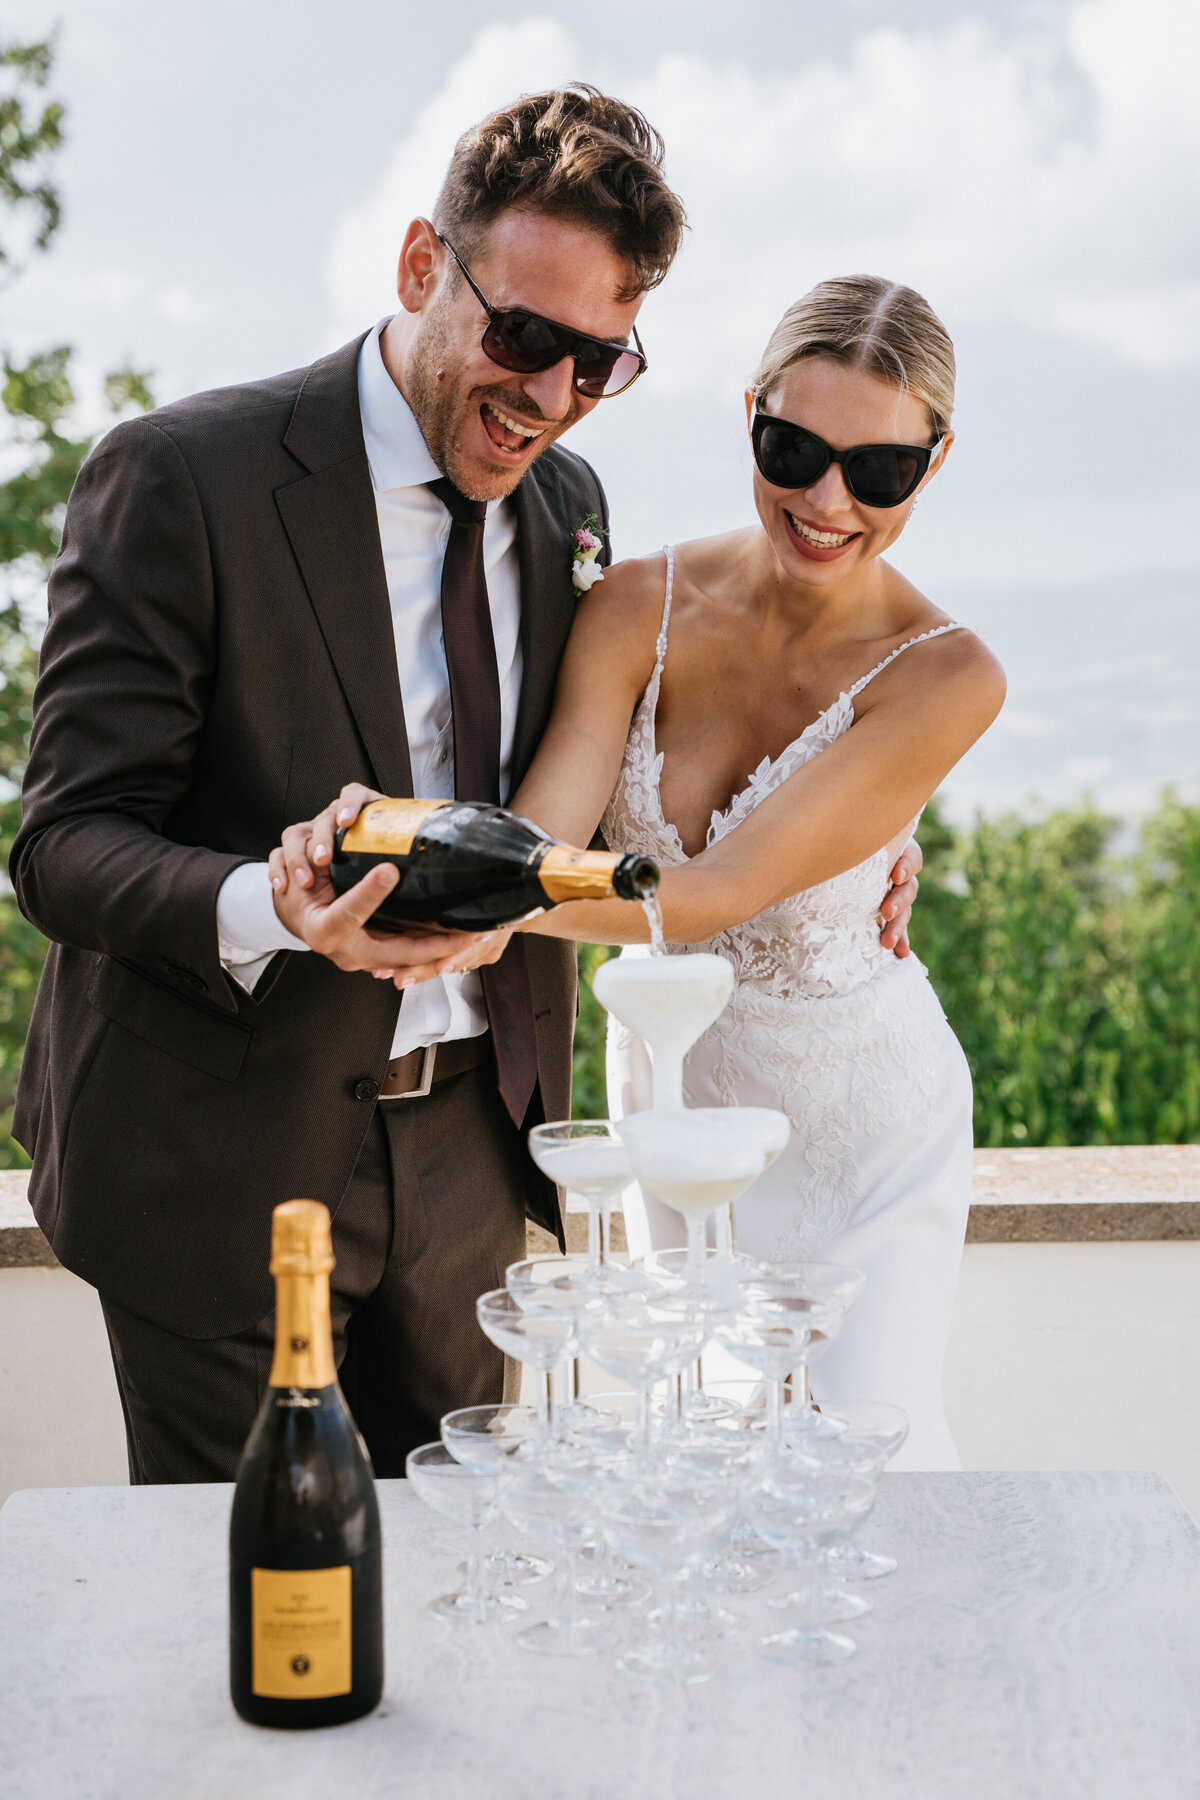 Couple pouring champange tower at their wedding in Tuscany